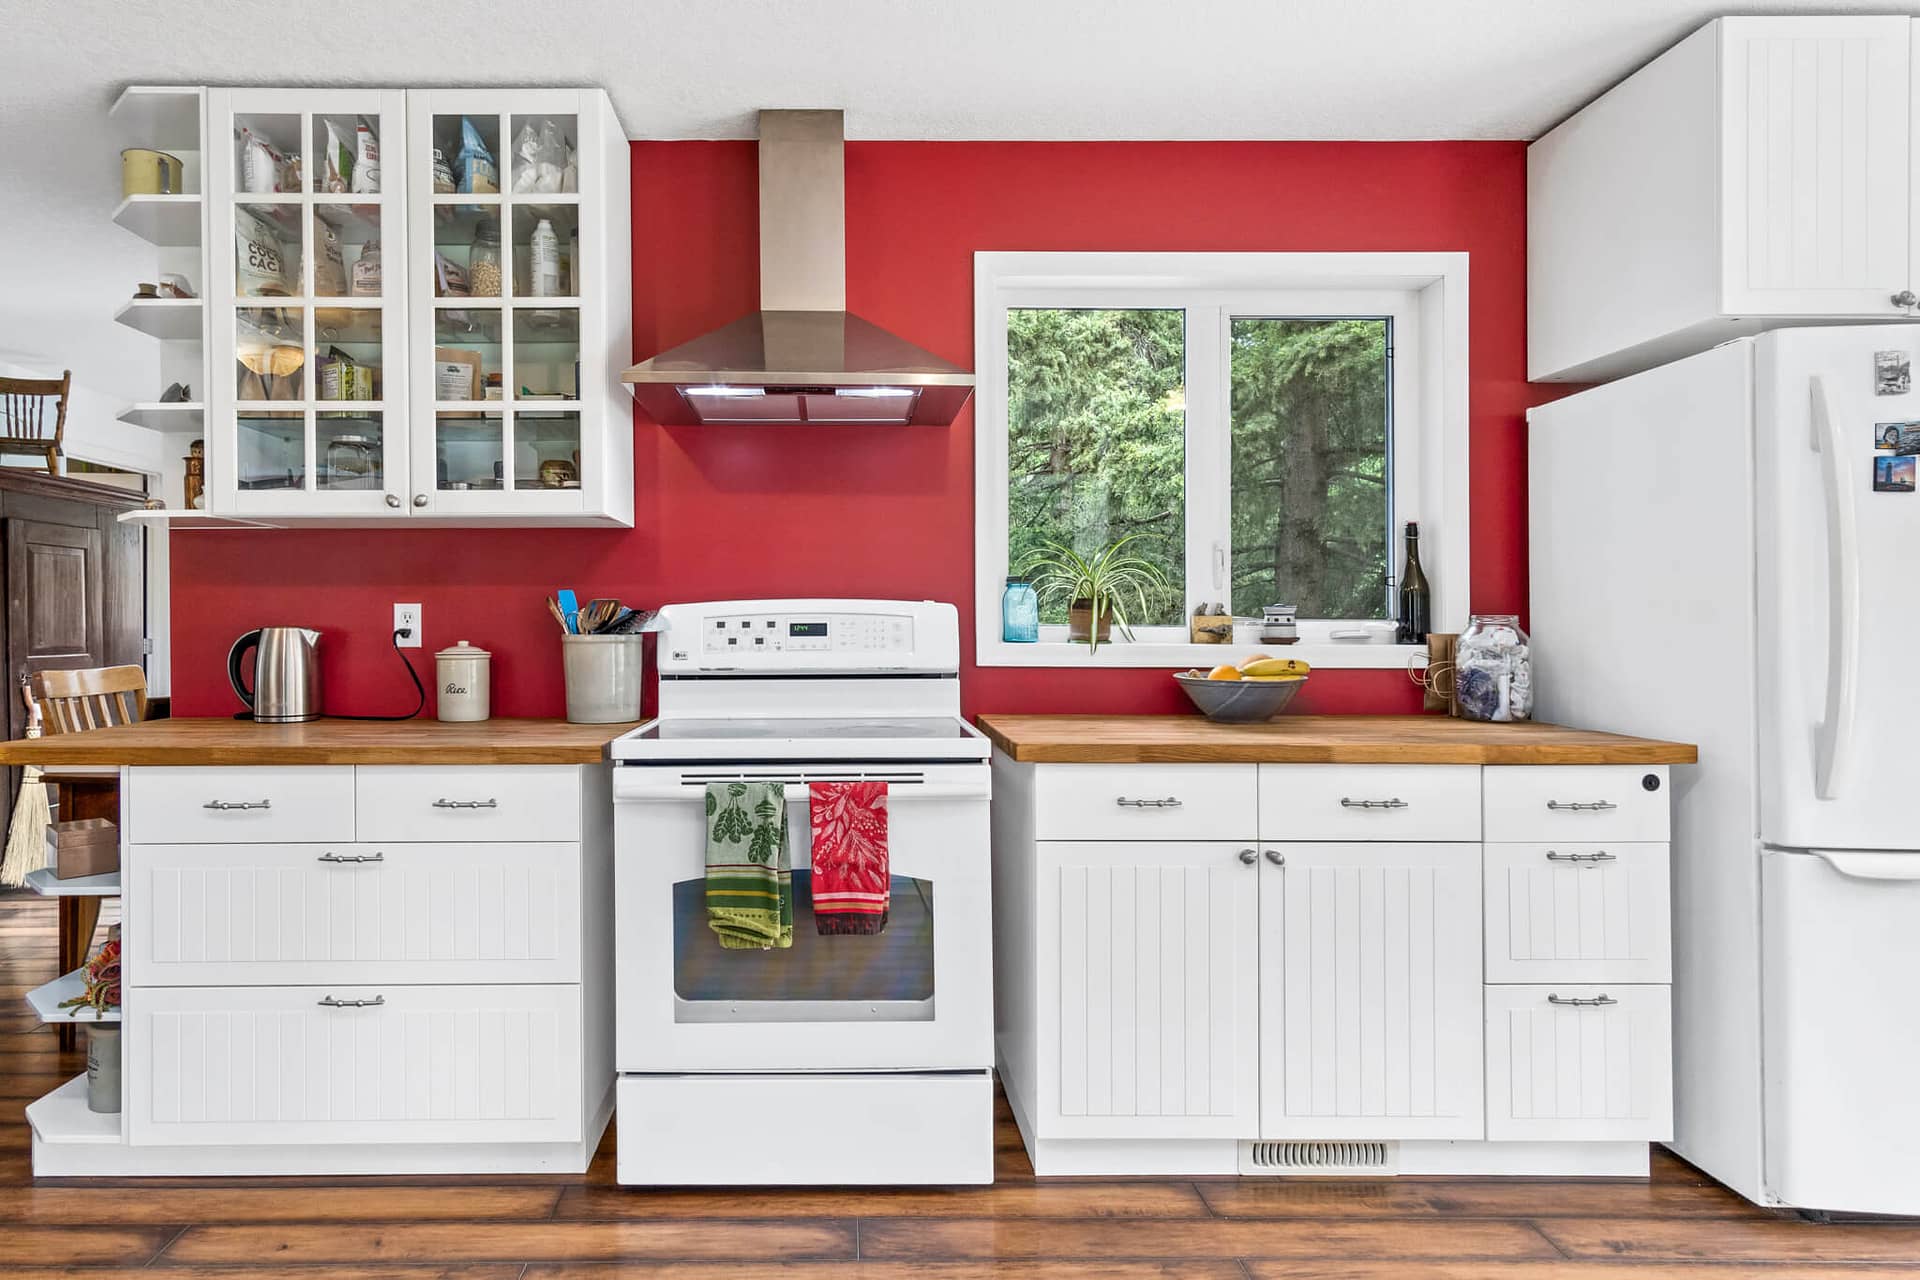 Country kitchen with red walls and white accents